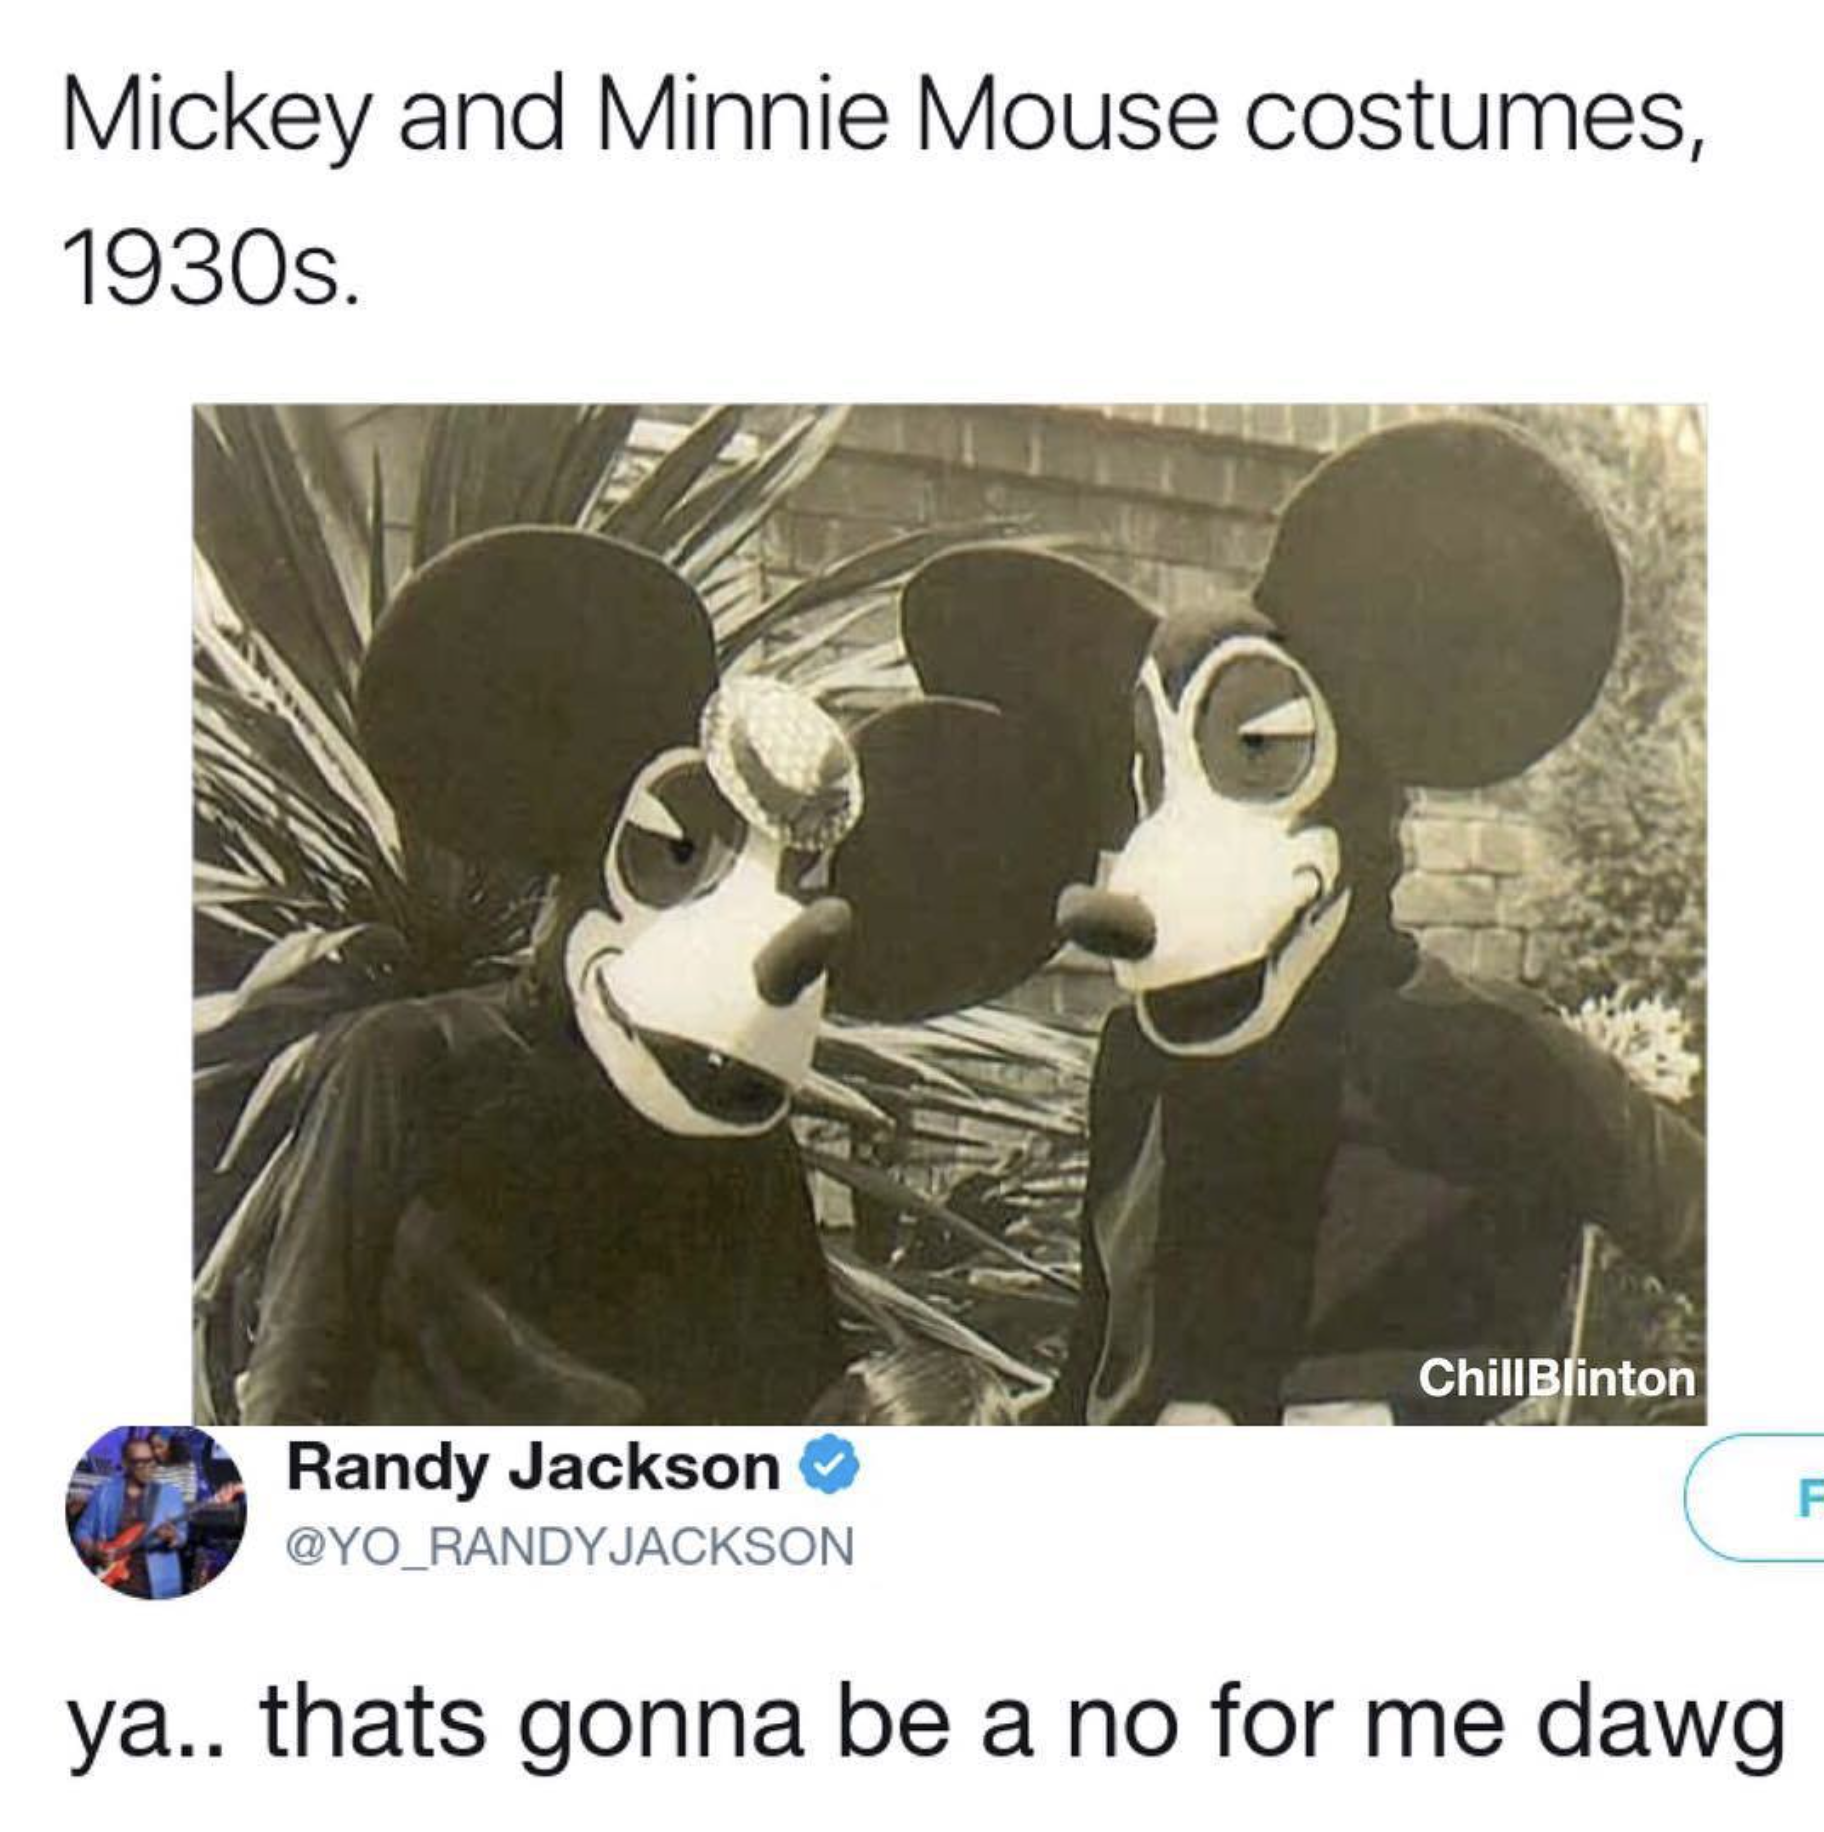 Really scary Mickey and Minnie Mouse costumes from the 30's